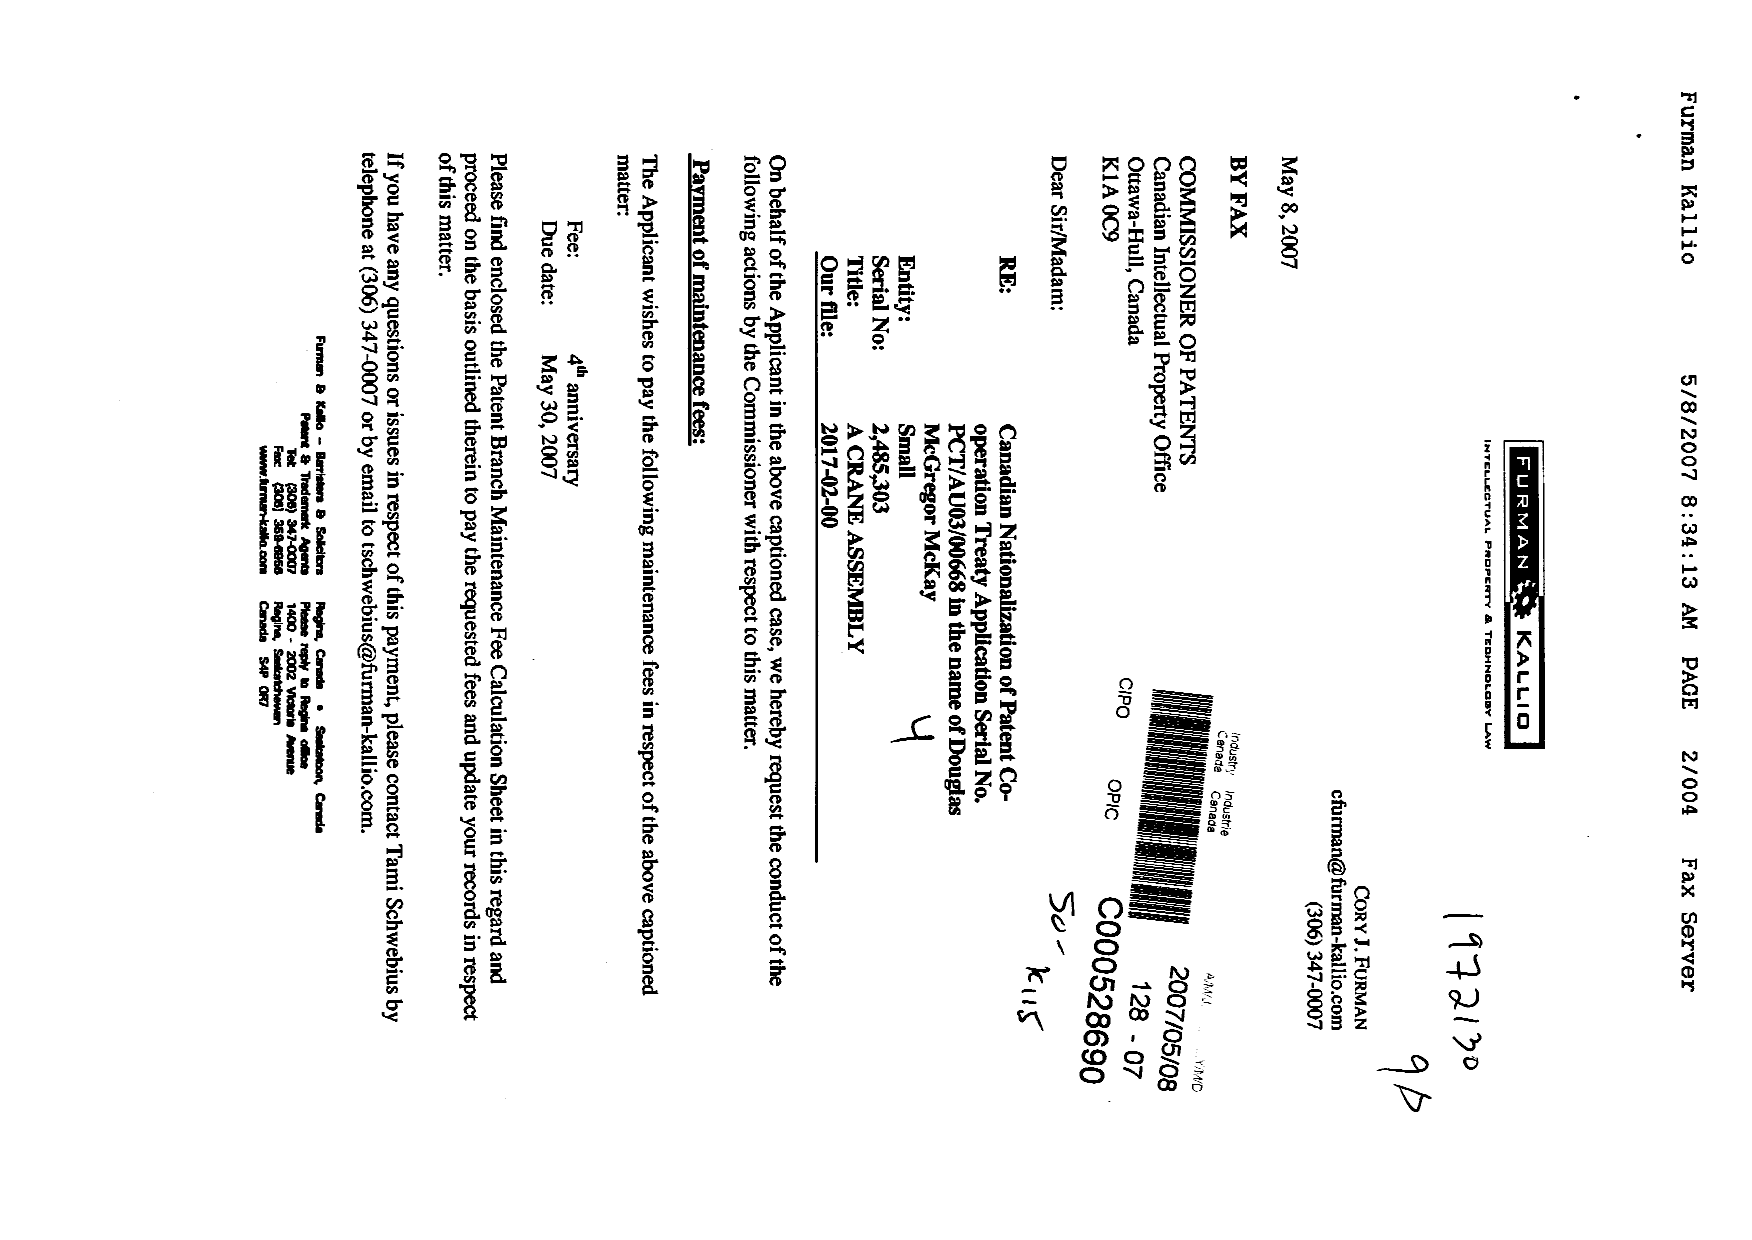 Canadian Patent Document 2485303. Fees 20070508. Image 1 of 4